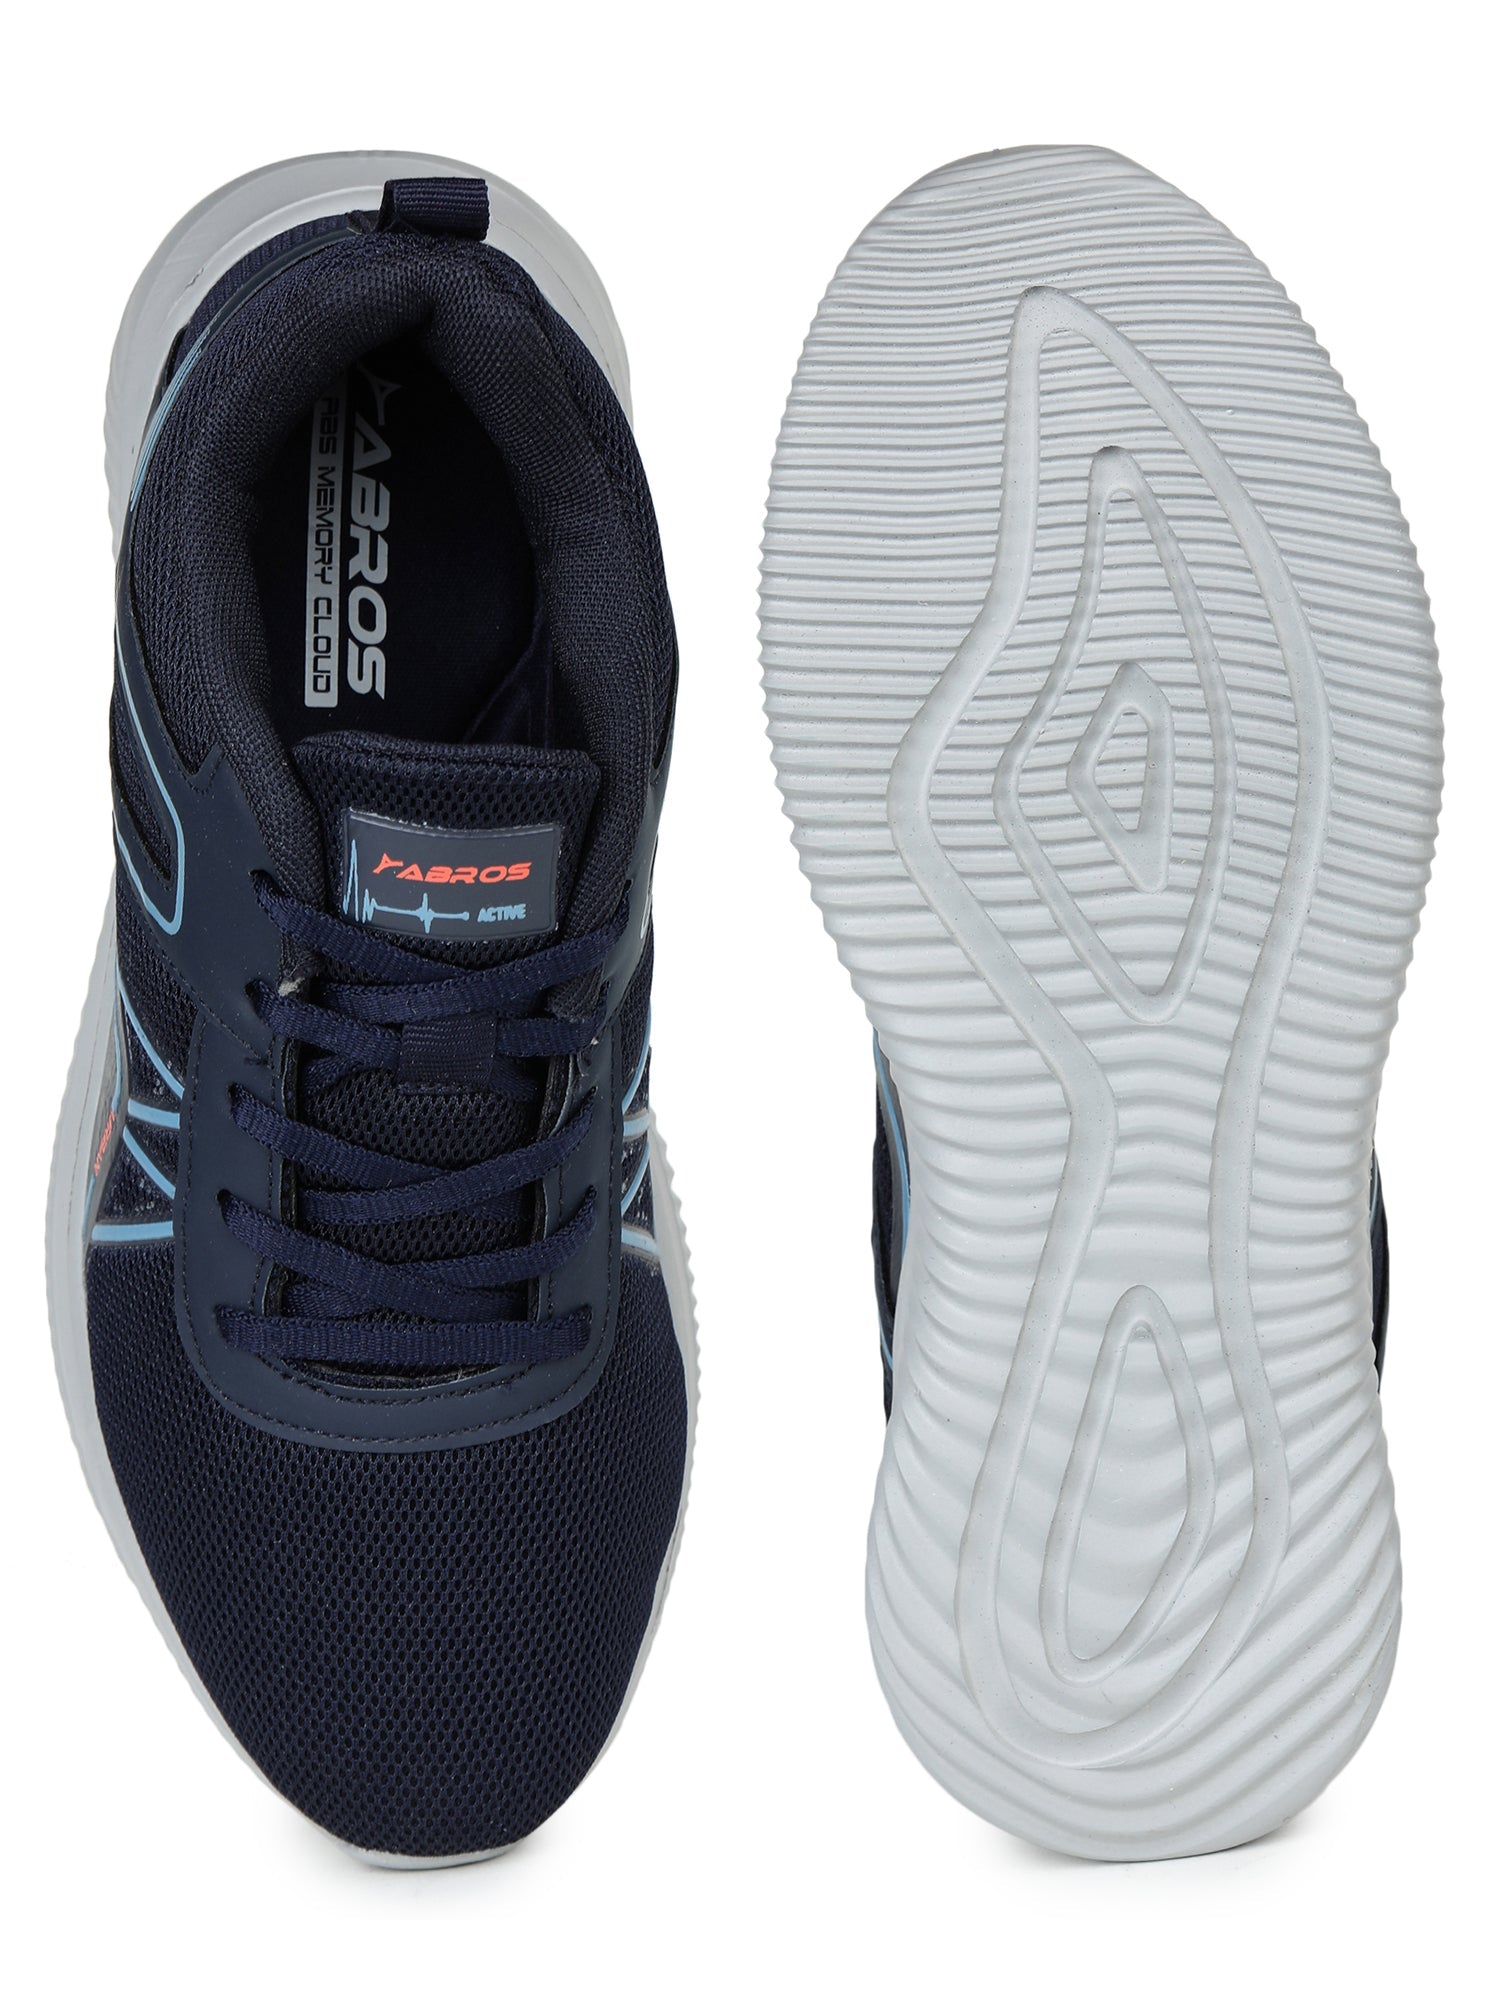 SMITH SPORT-SHOES For MEN'S